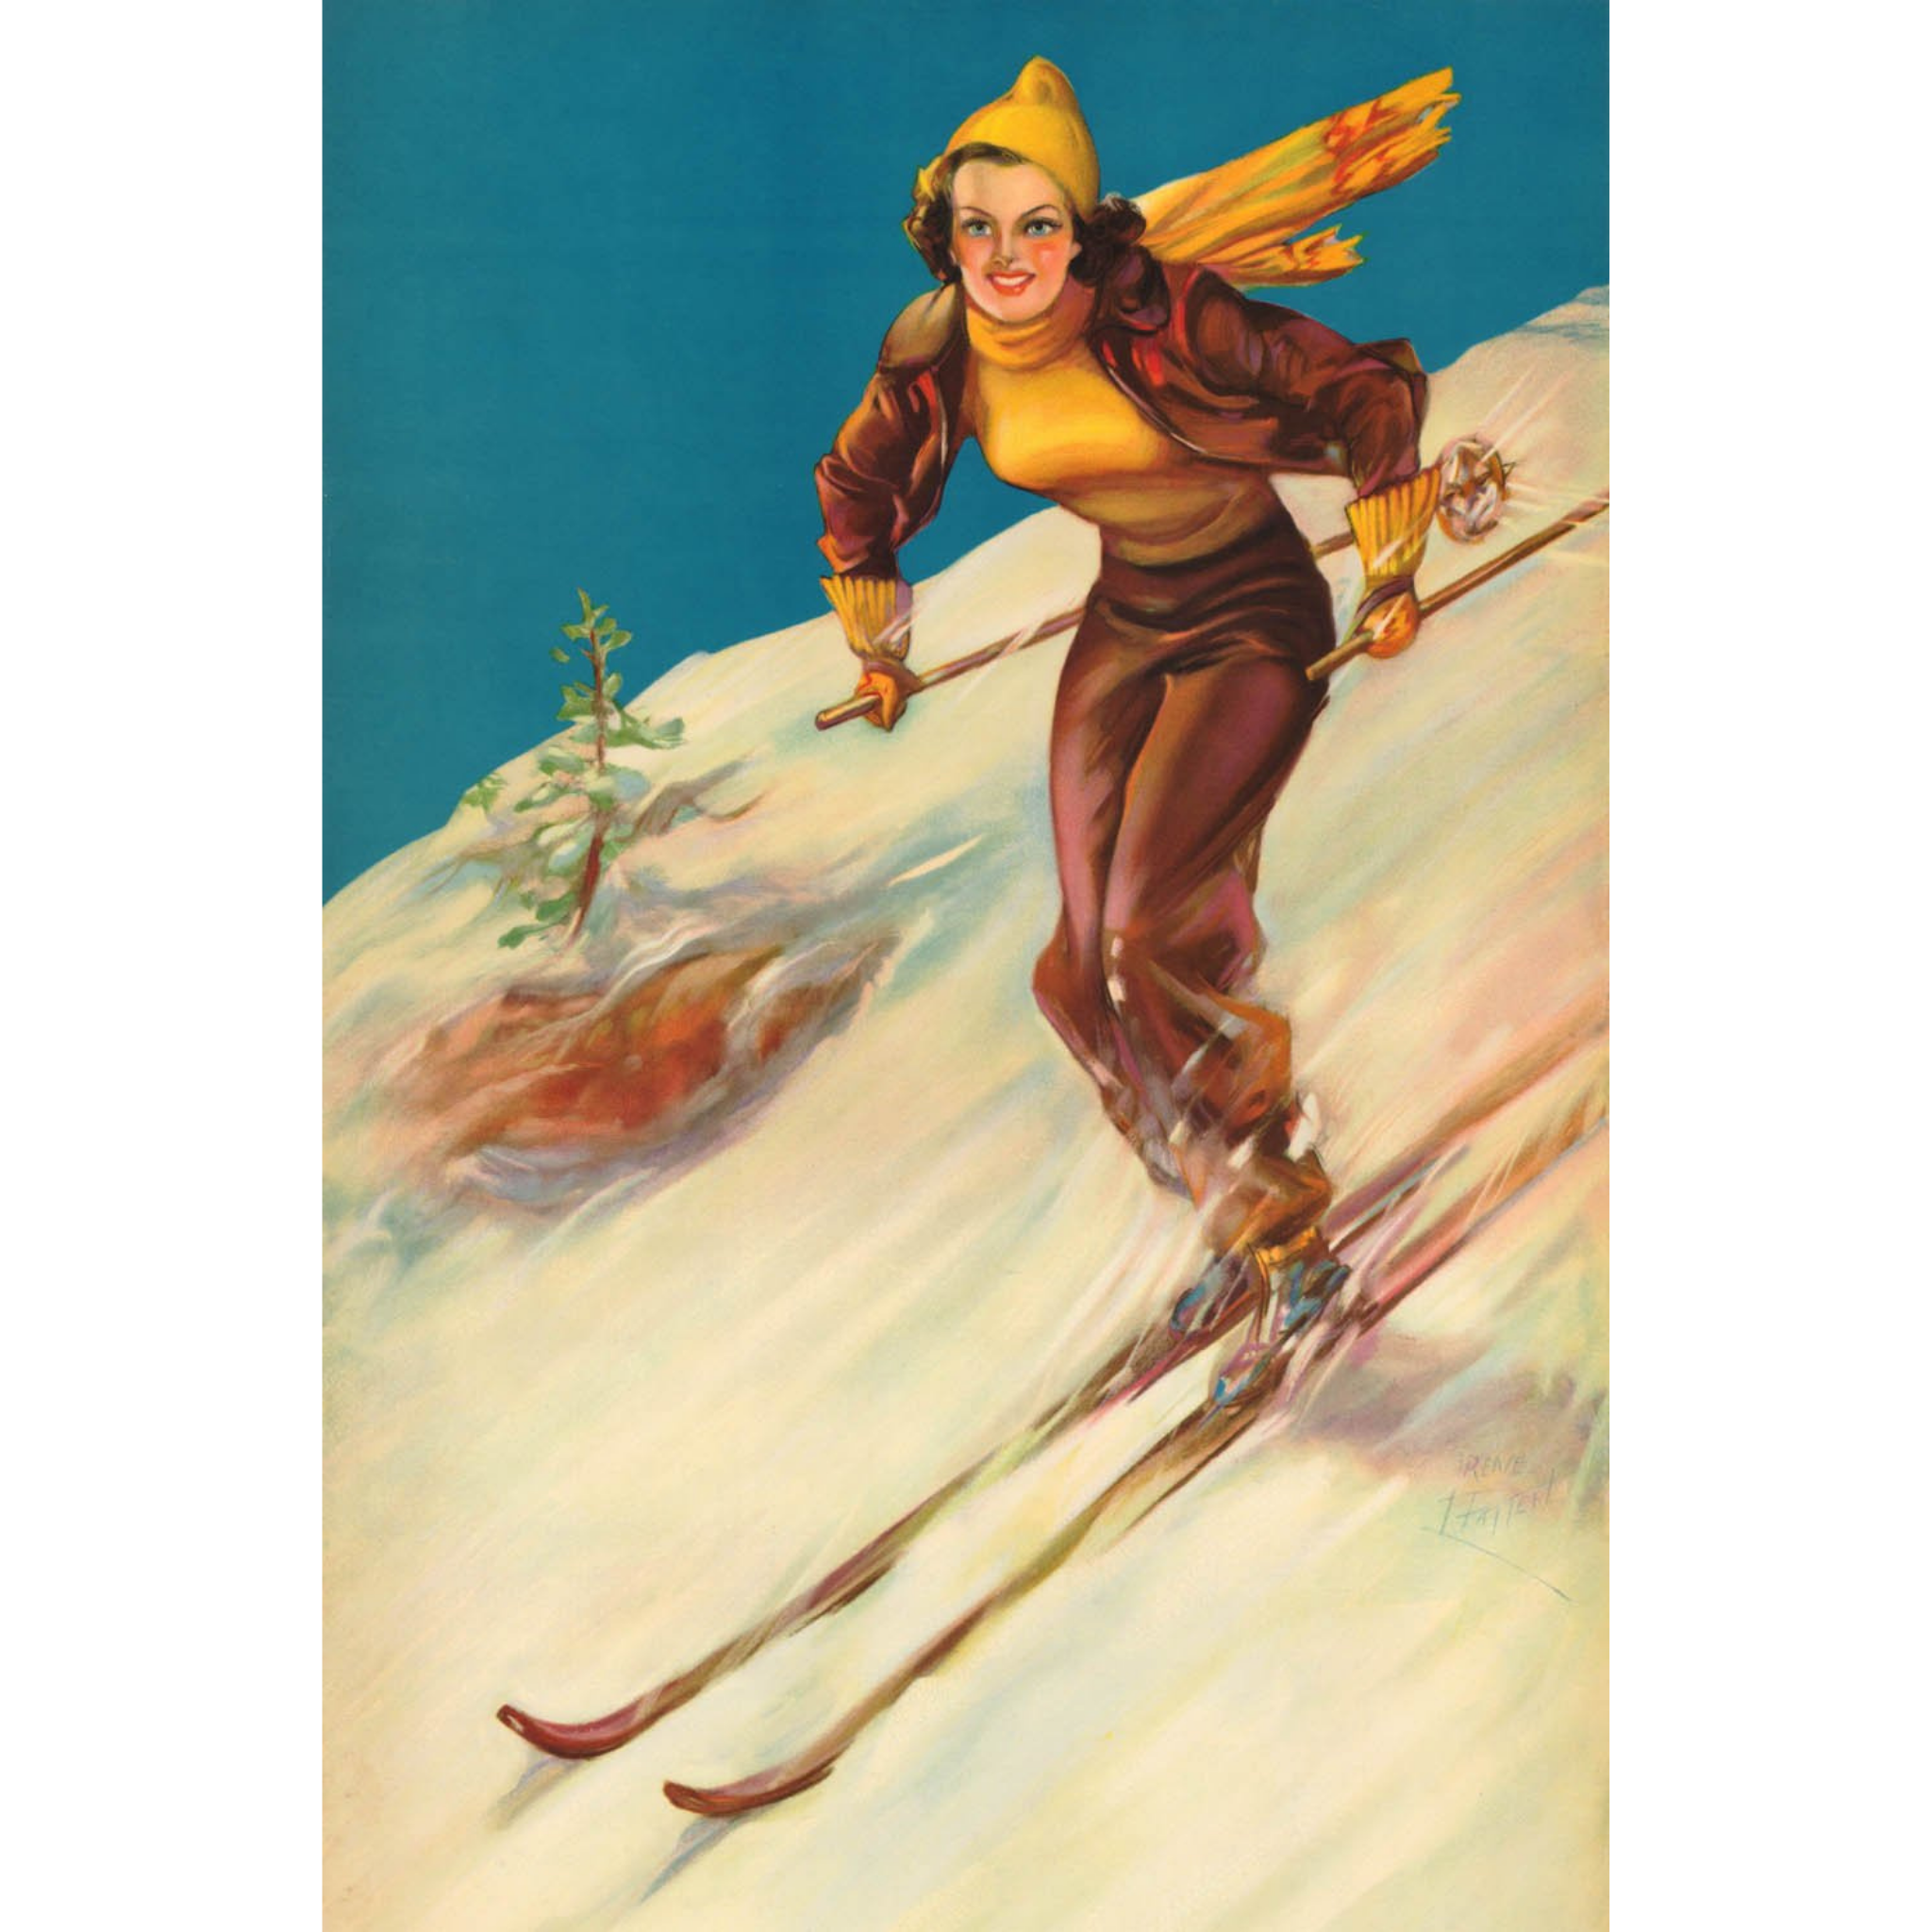 Woman on Skis with Gold Sweater and Scarf - ca. 1950 Lithograph